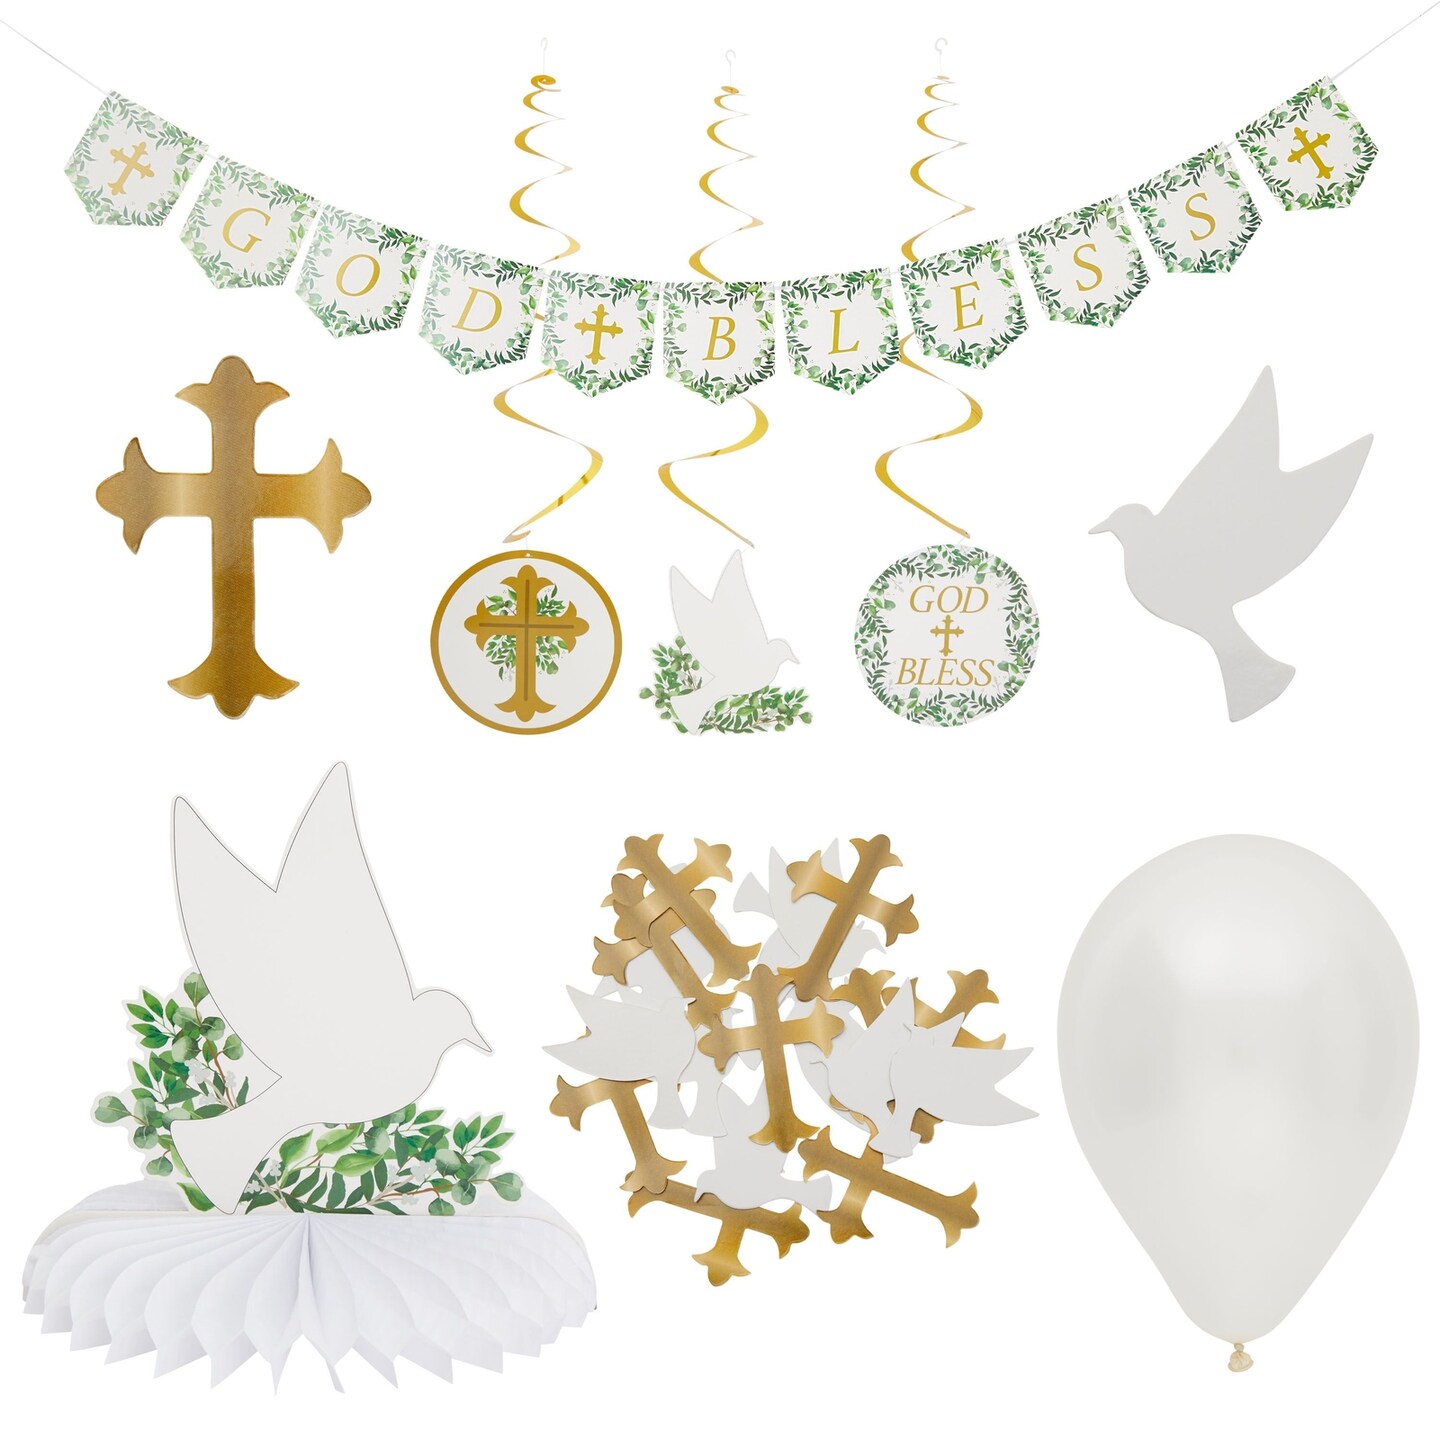 Baptism Decorations Party Set with Hanging Swirls, God Bless Banner, Balloons, Confetti, Centerpiece (58 Pieces)